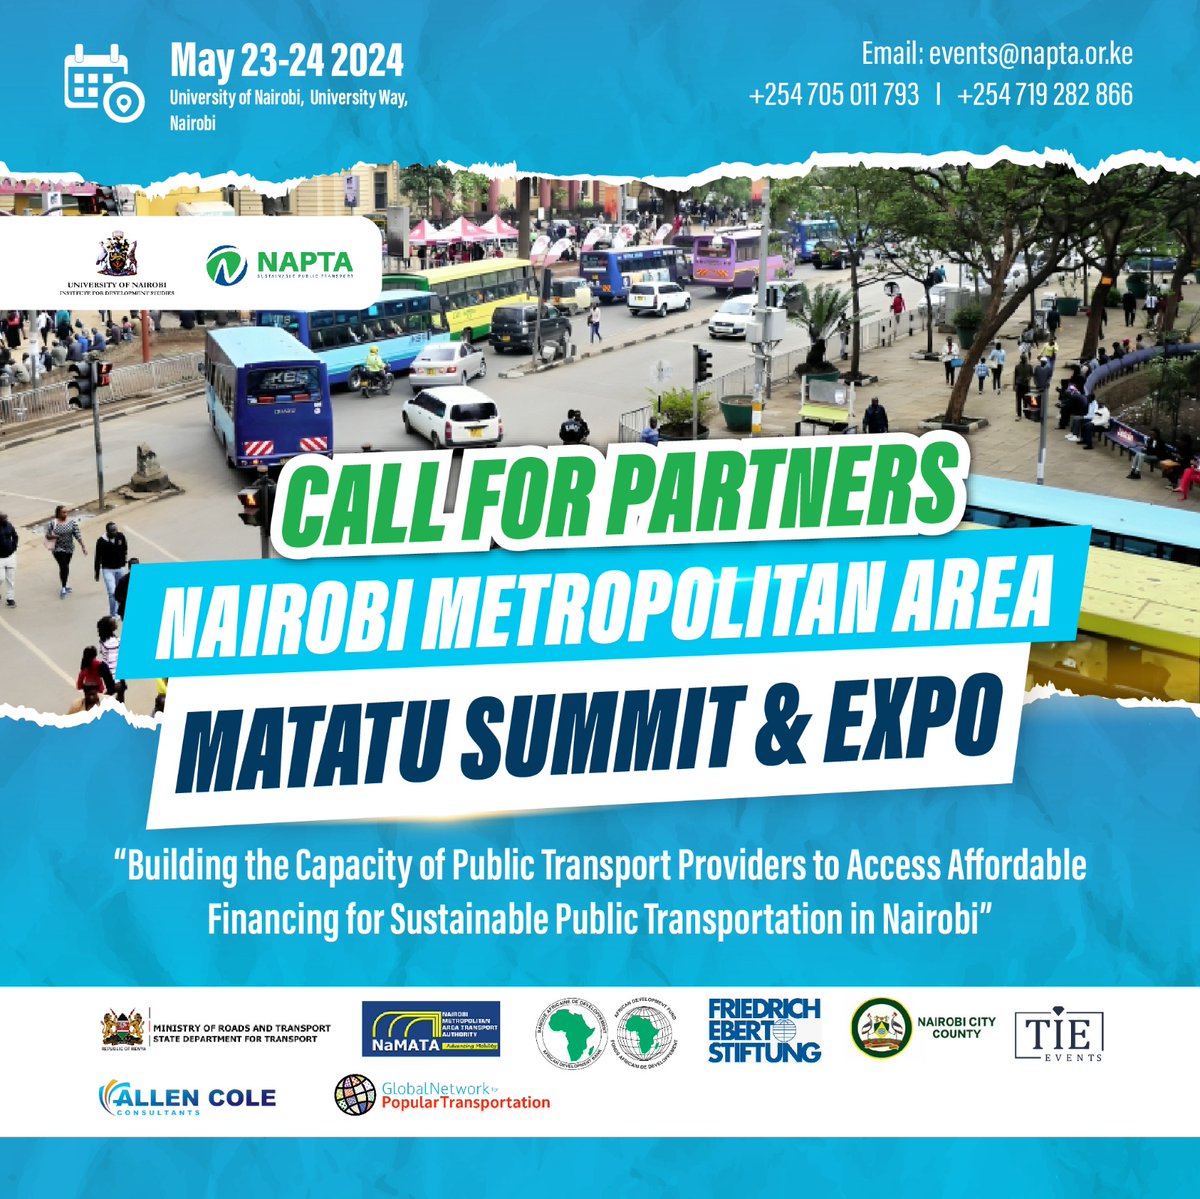 Calling all potential partners! Join us in shaping the future of transportation at the Nairobi Metropolitan Area Matatu Summit and Expo. Collaborate with us to drive innovation, promote sustainability, and improve commuter experiences. Contact us to partner. #MatatuSummit